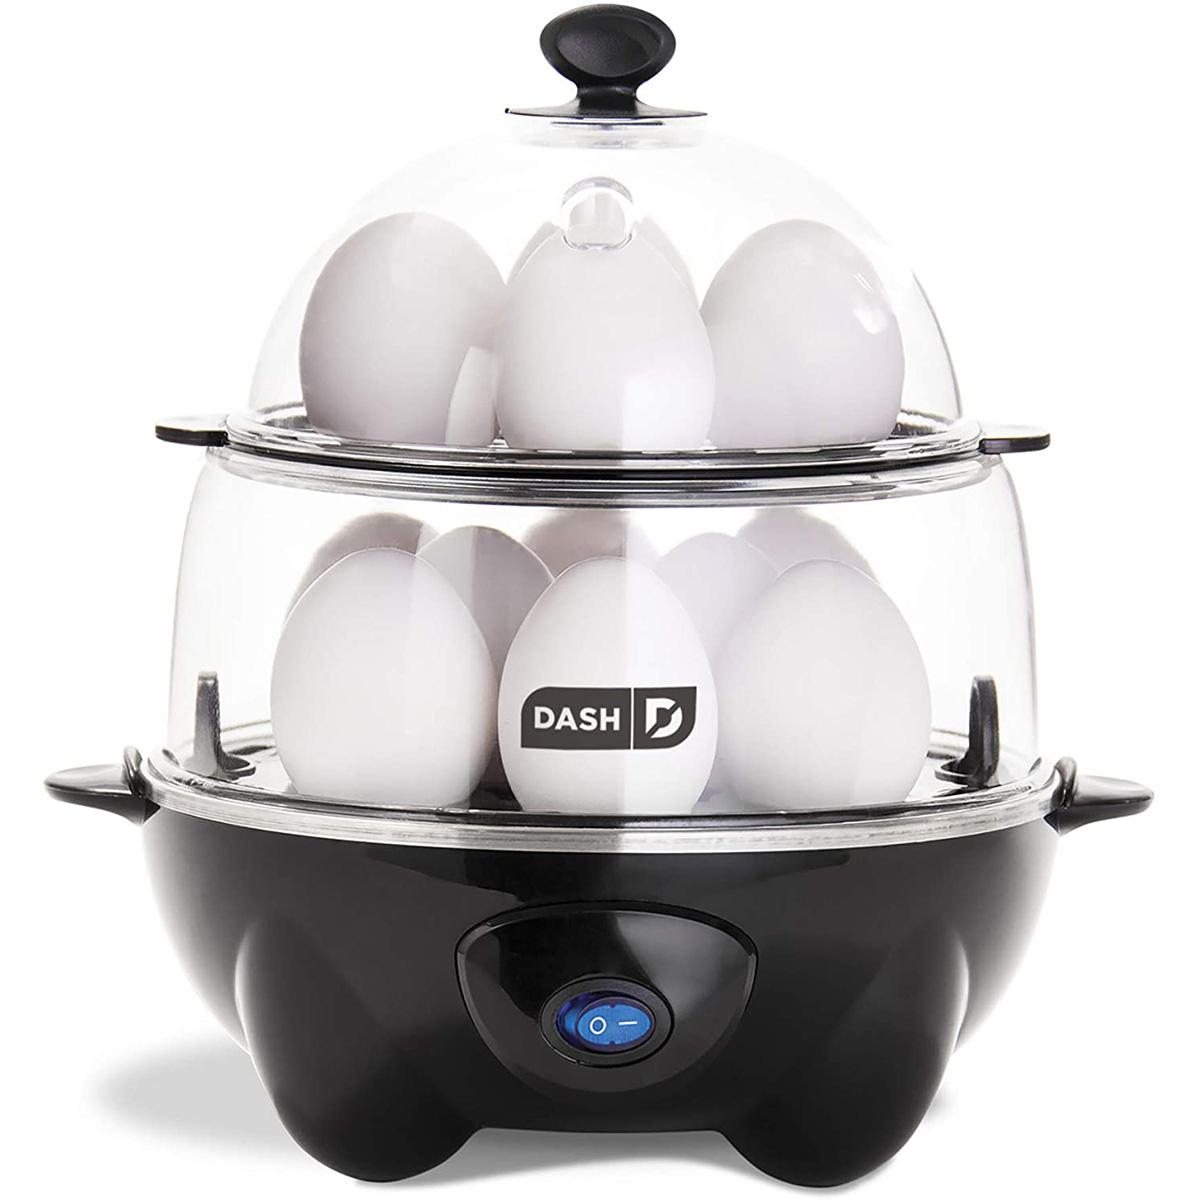 Dash Deluxe Rapid Egg Cooker for $19.99